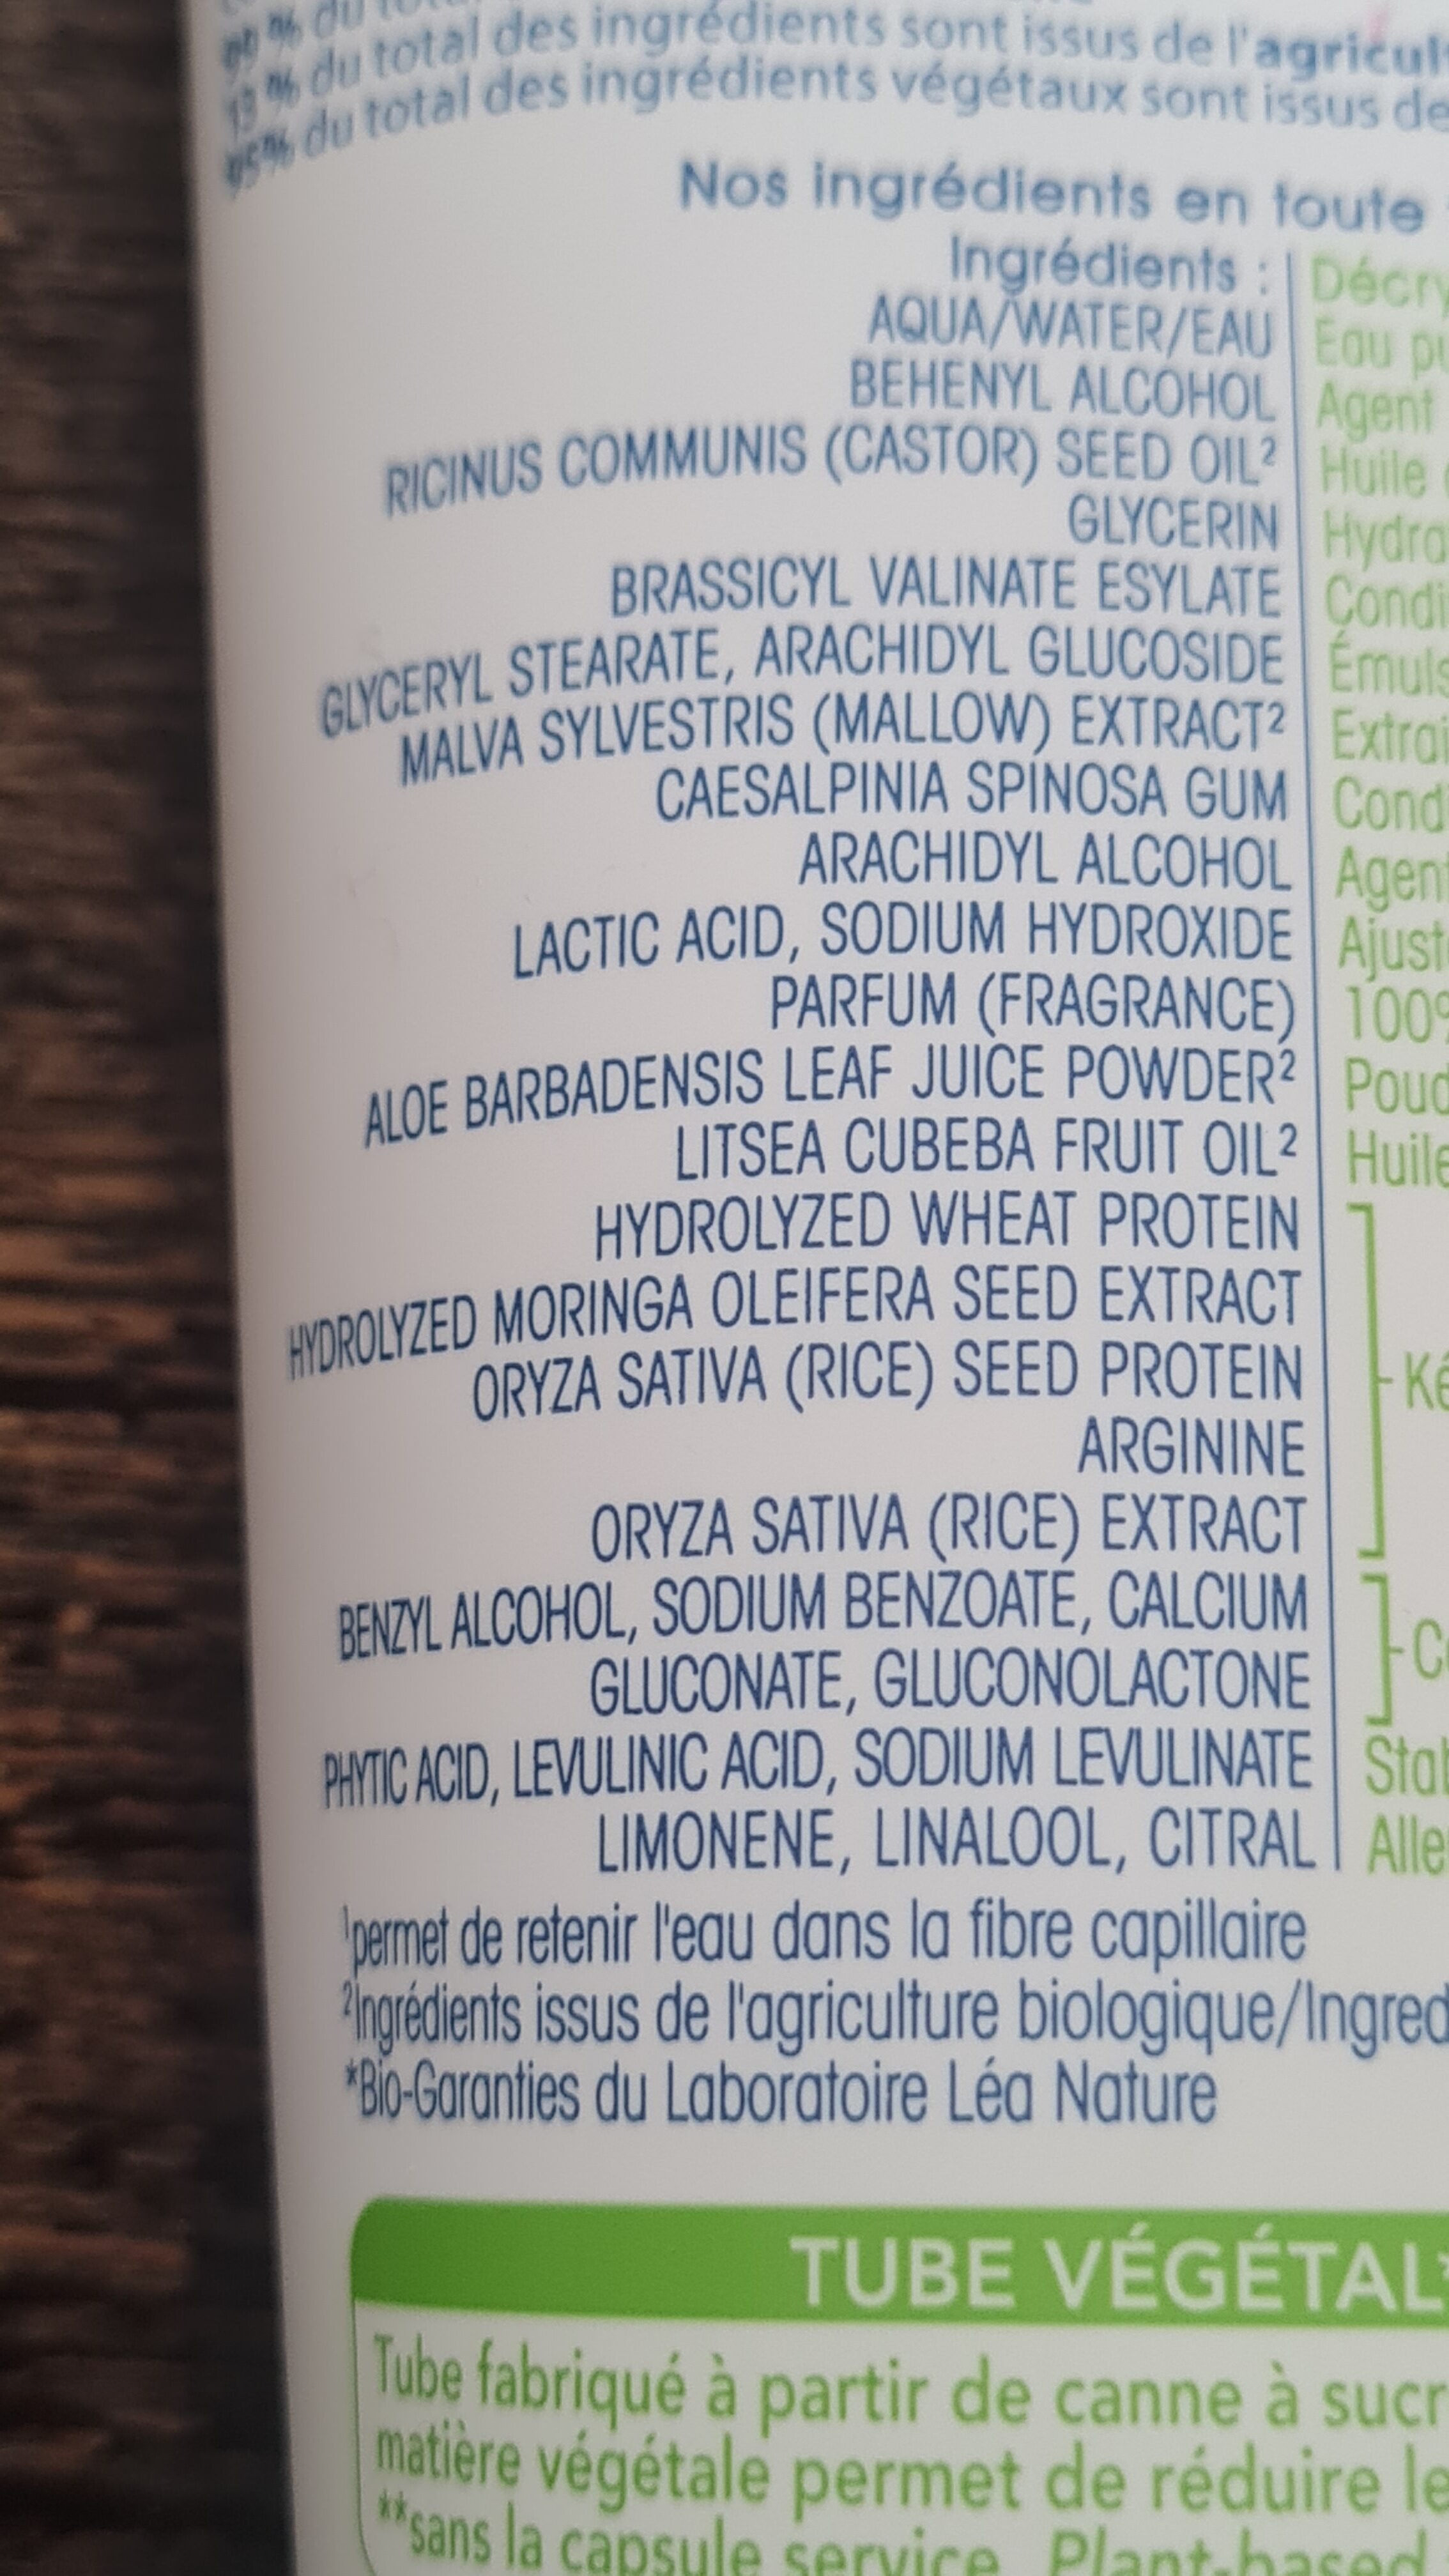 après shampoing fortifiant - Ingredients - fr